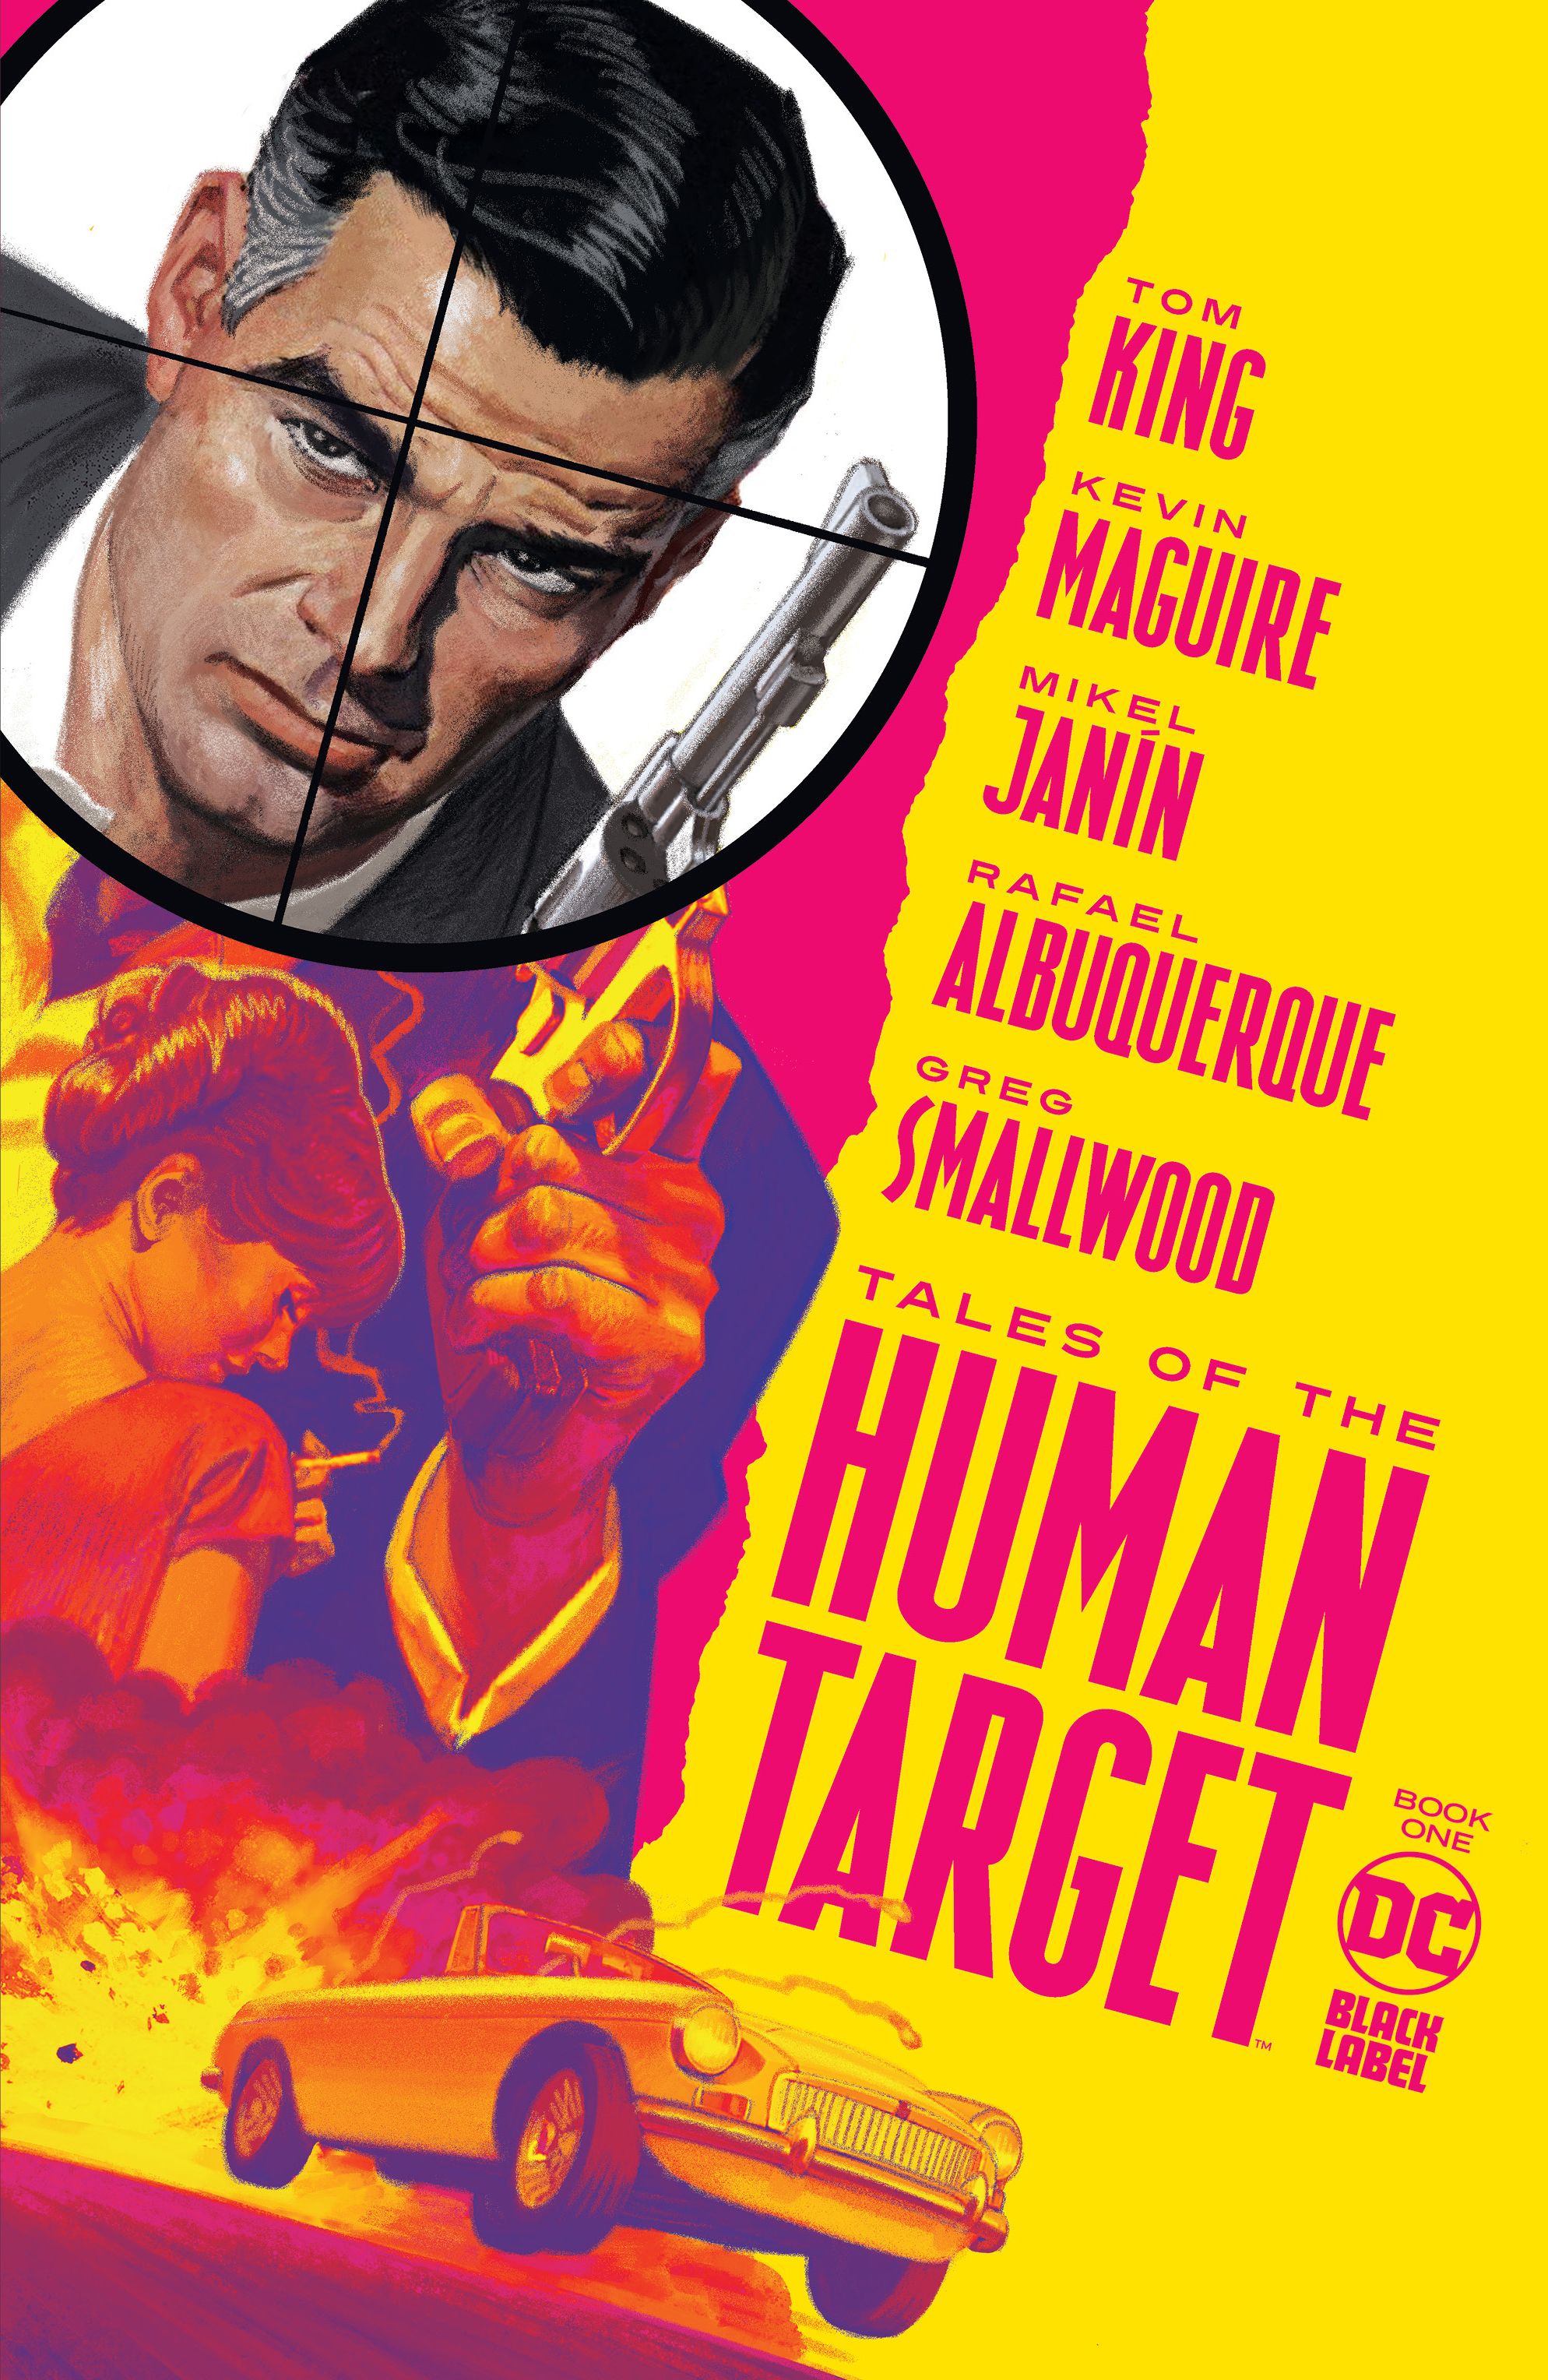 Tales of The Human Target Comic